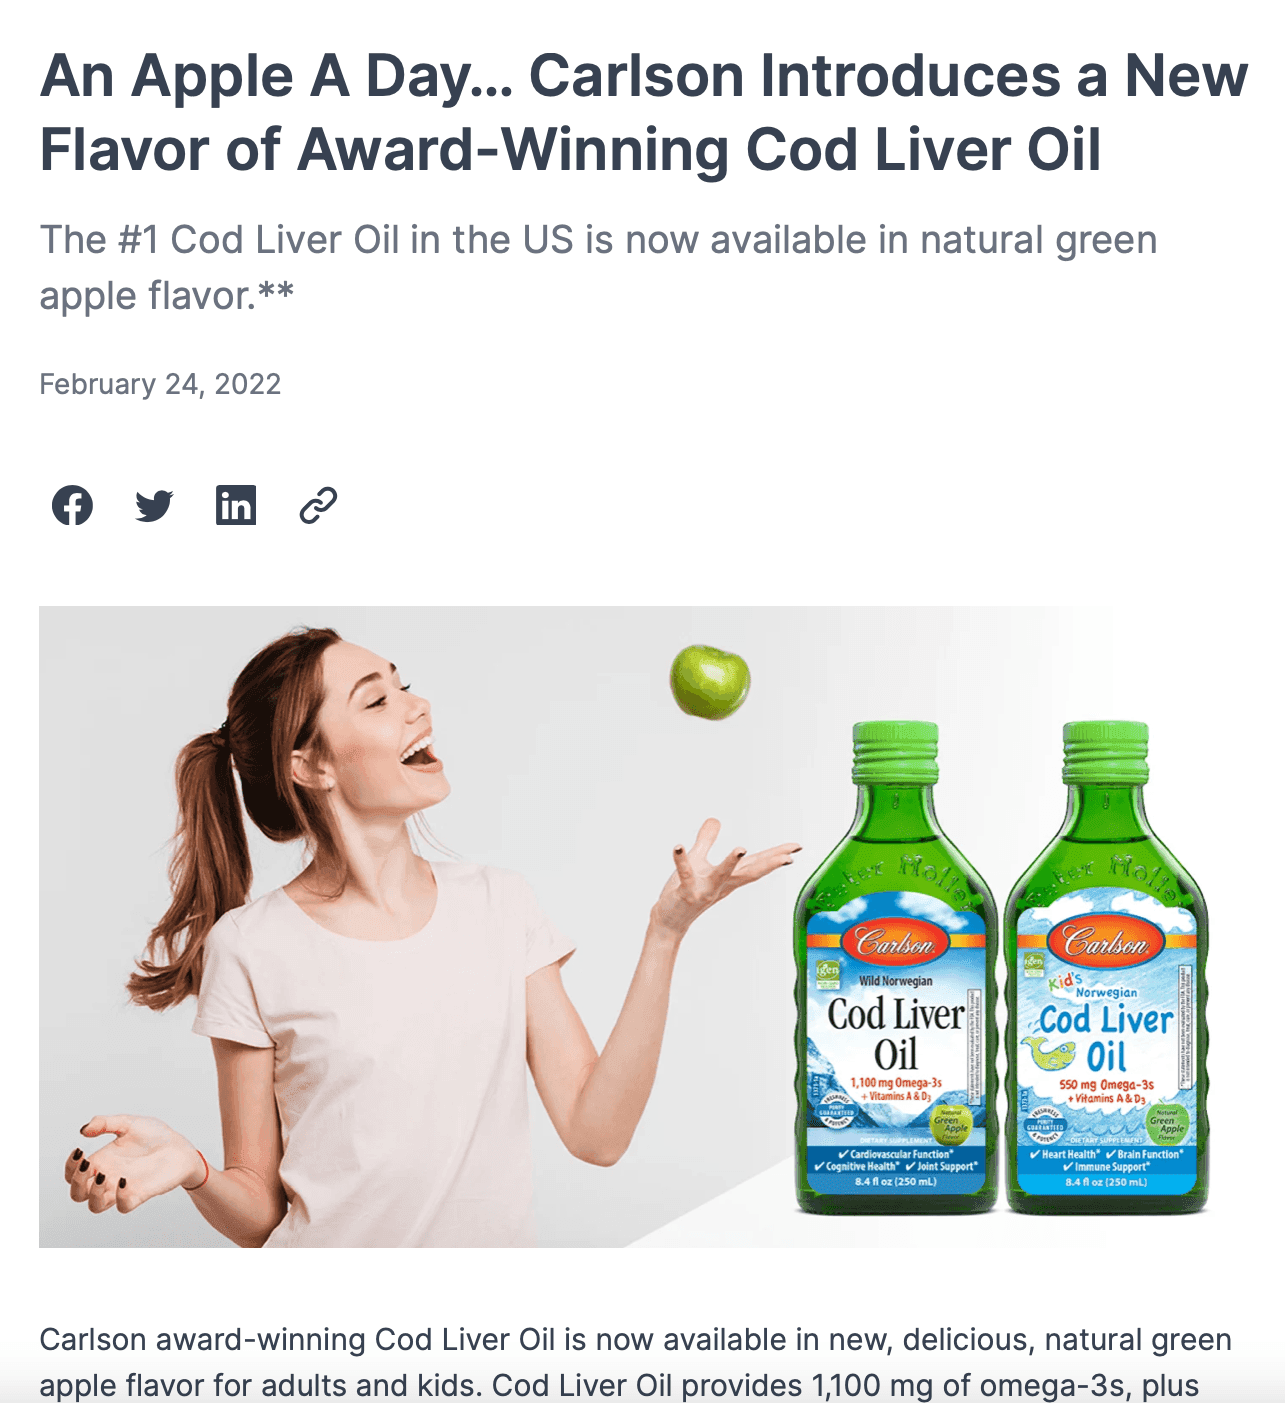 Carlson press release regarding their new olive oil product 